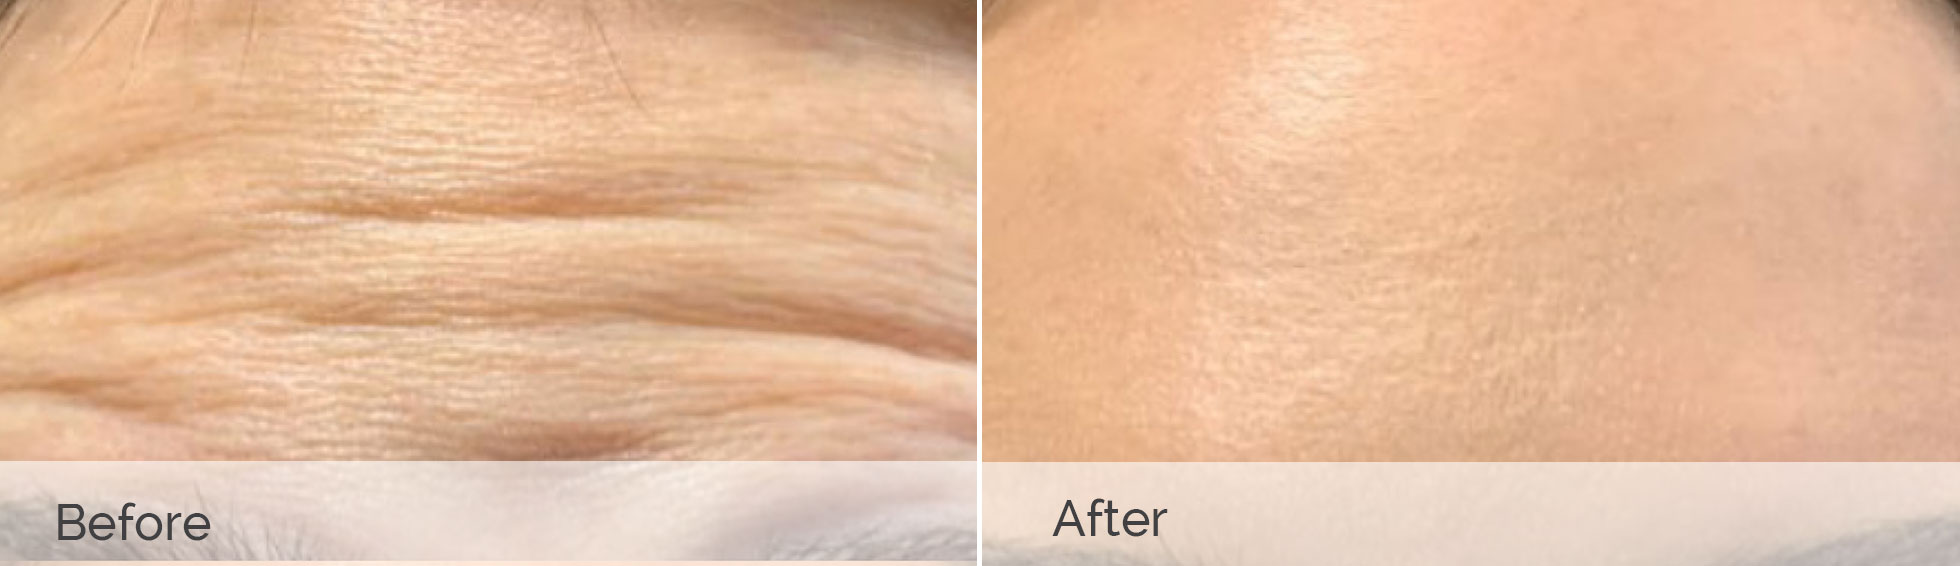 Wrinkle Reduction